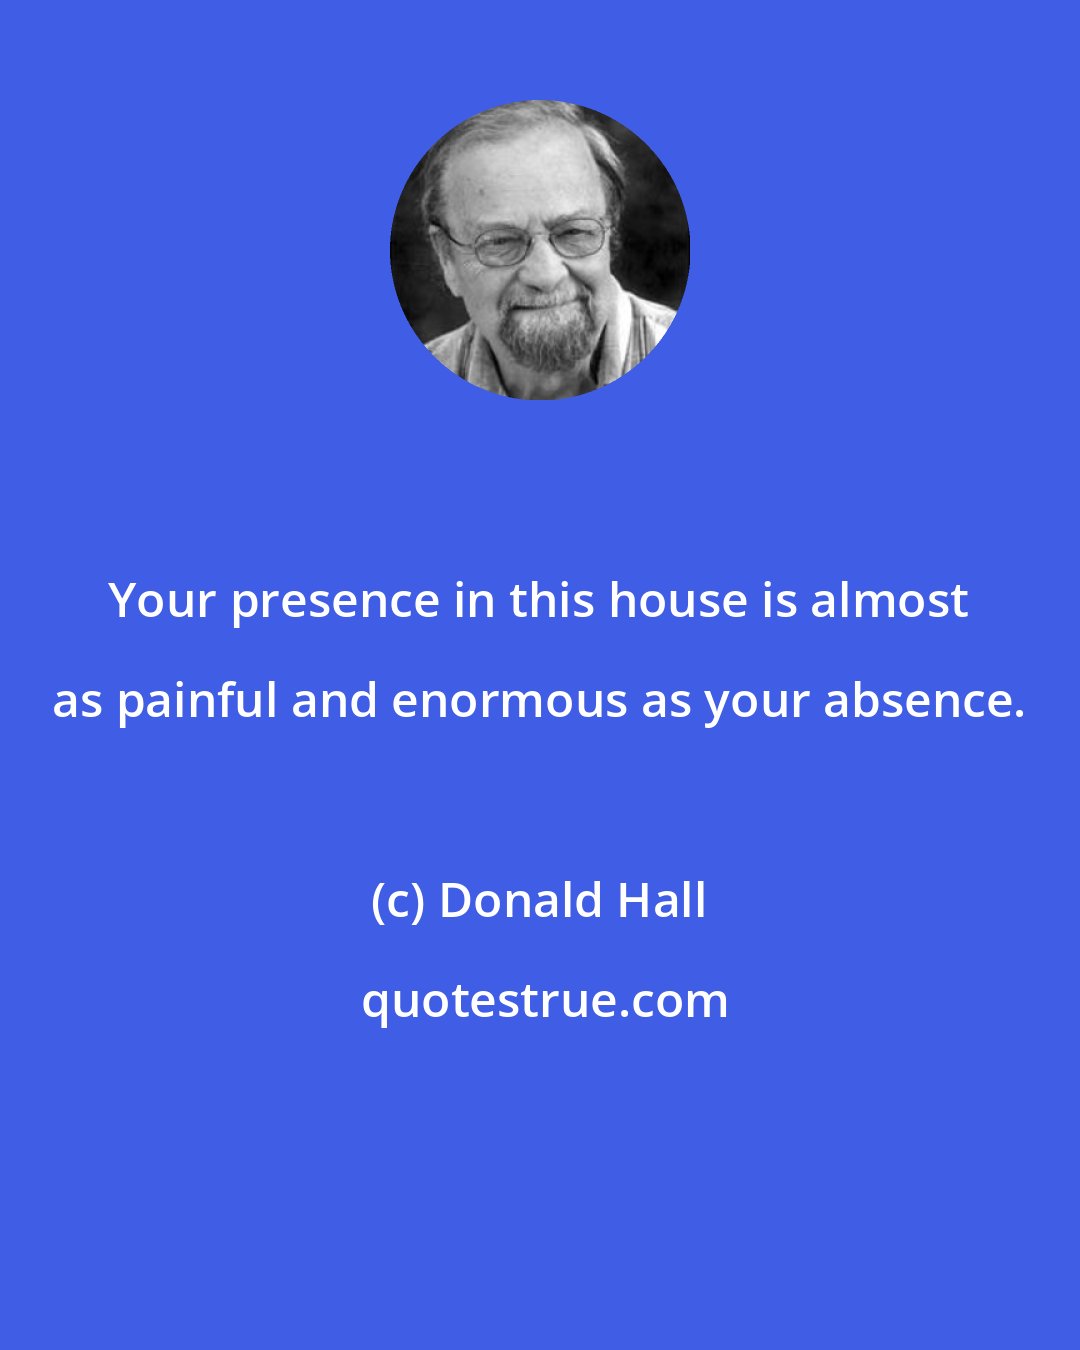 Donald Hall: Your presence in this house is almost as painful and enormous as your absence.